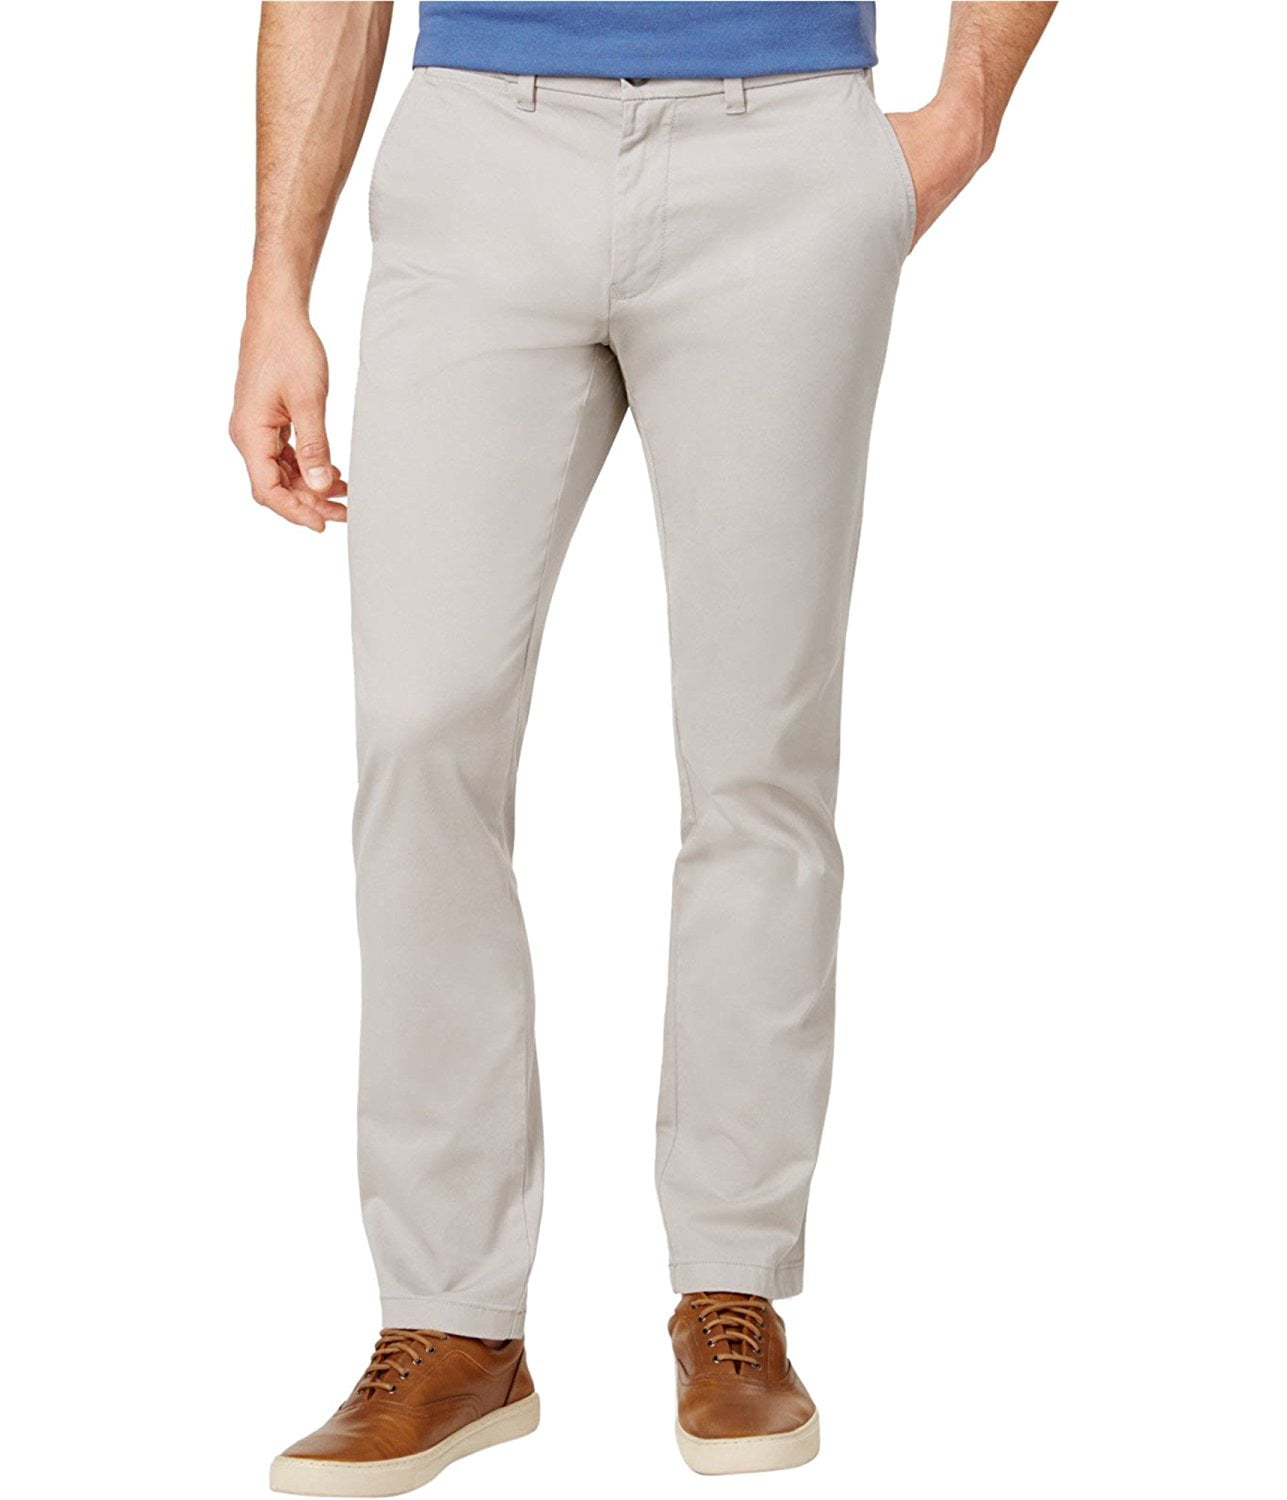 Tommy Hilfiger - Tommy Hilfiger NEW Gray Mens Size 36X34 Khakis Chinos ...